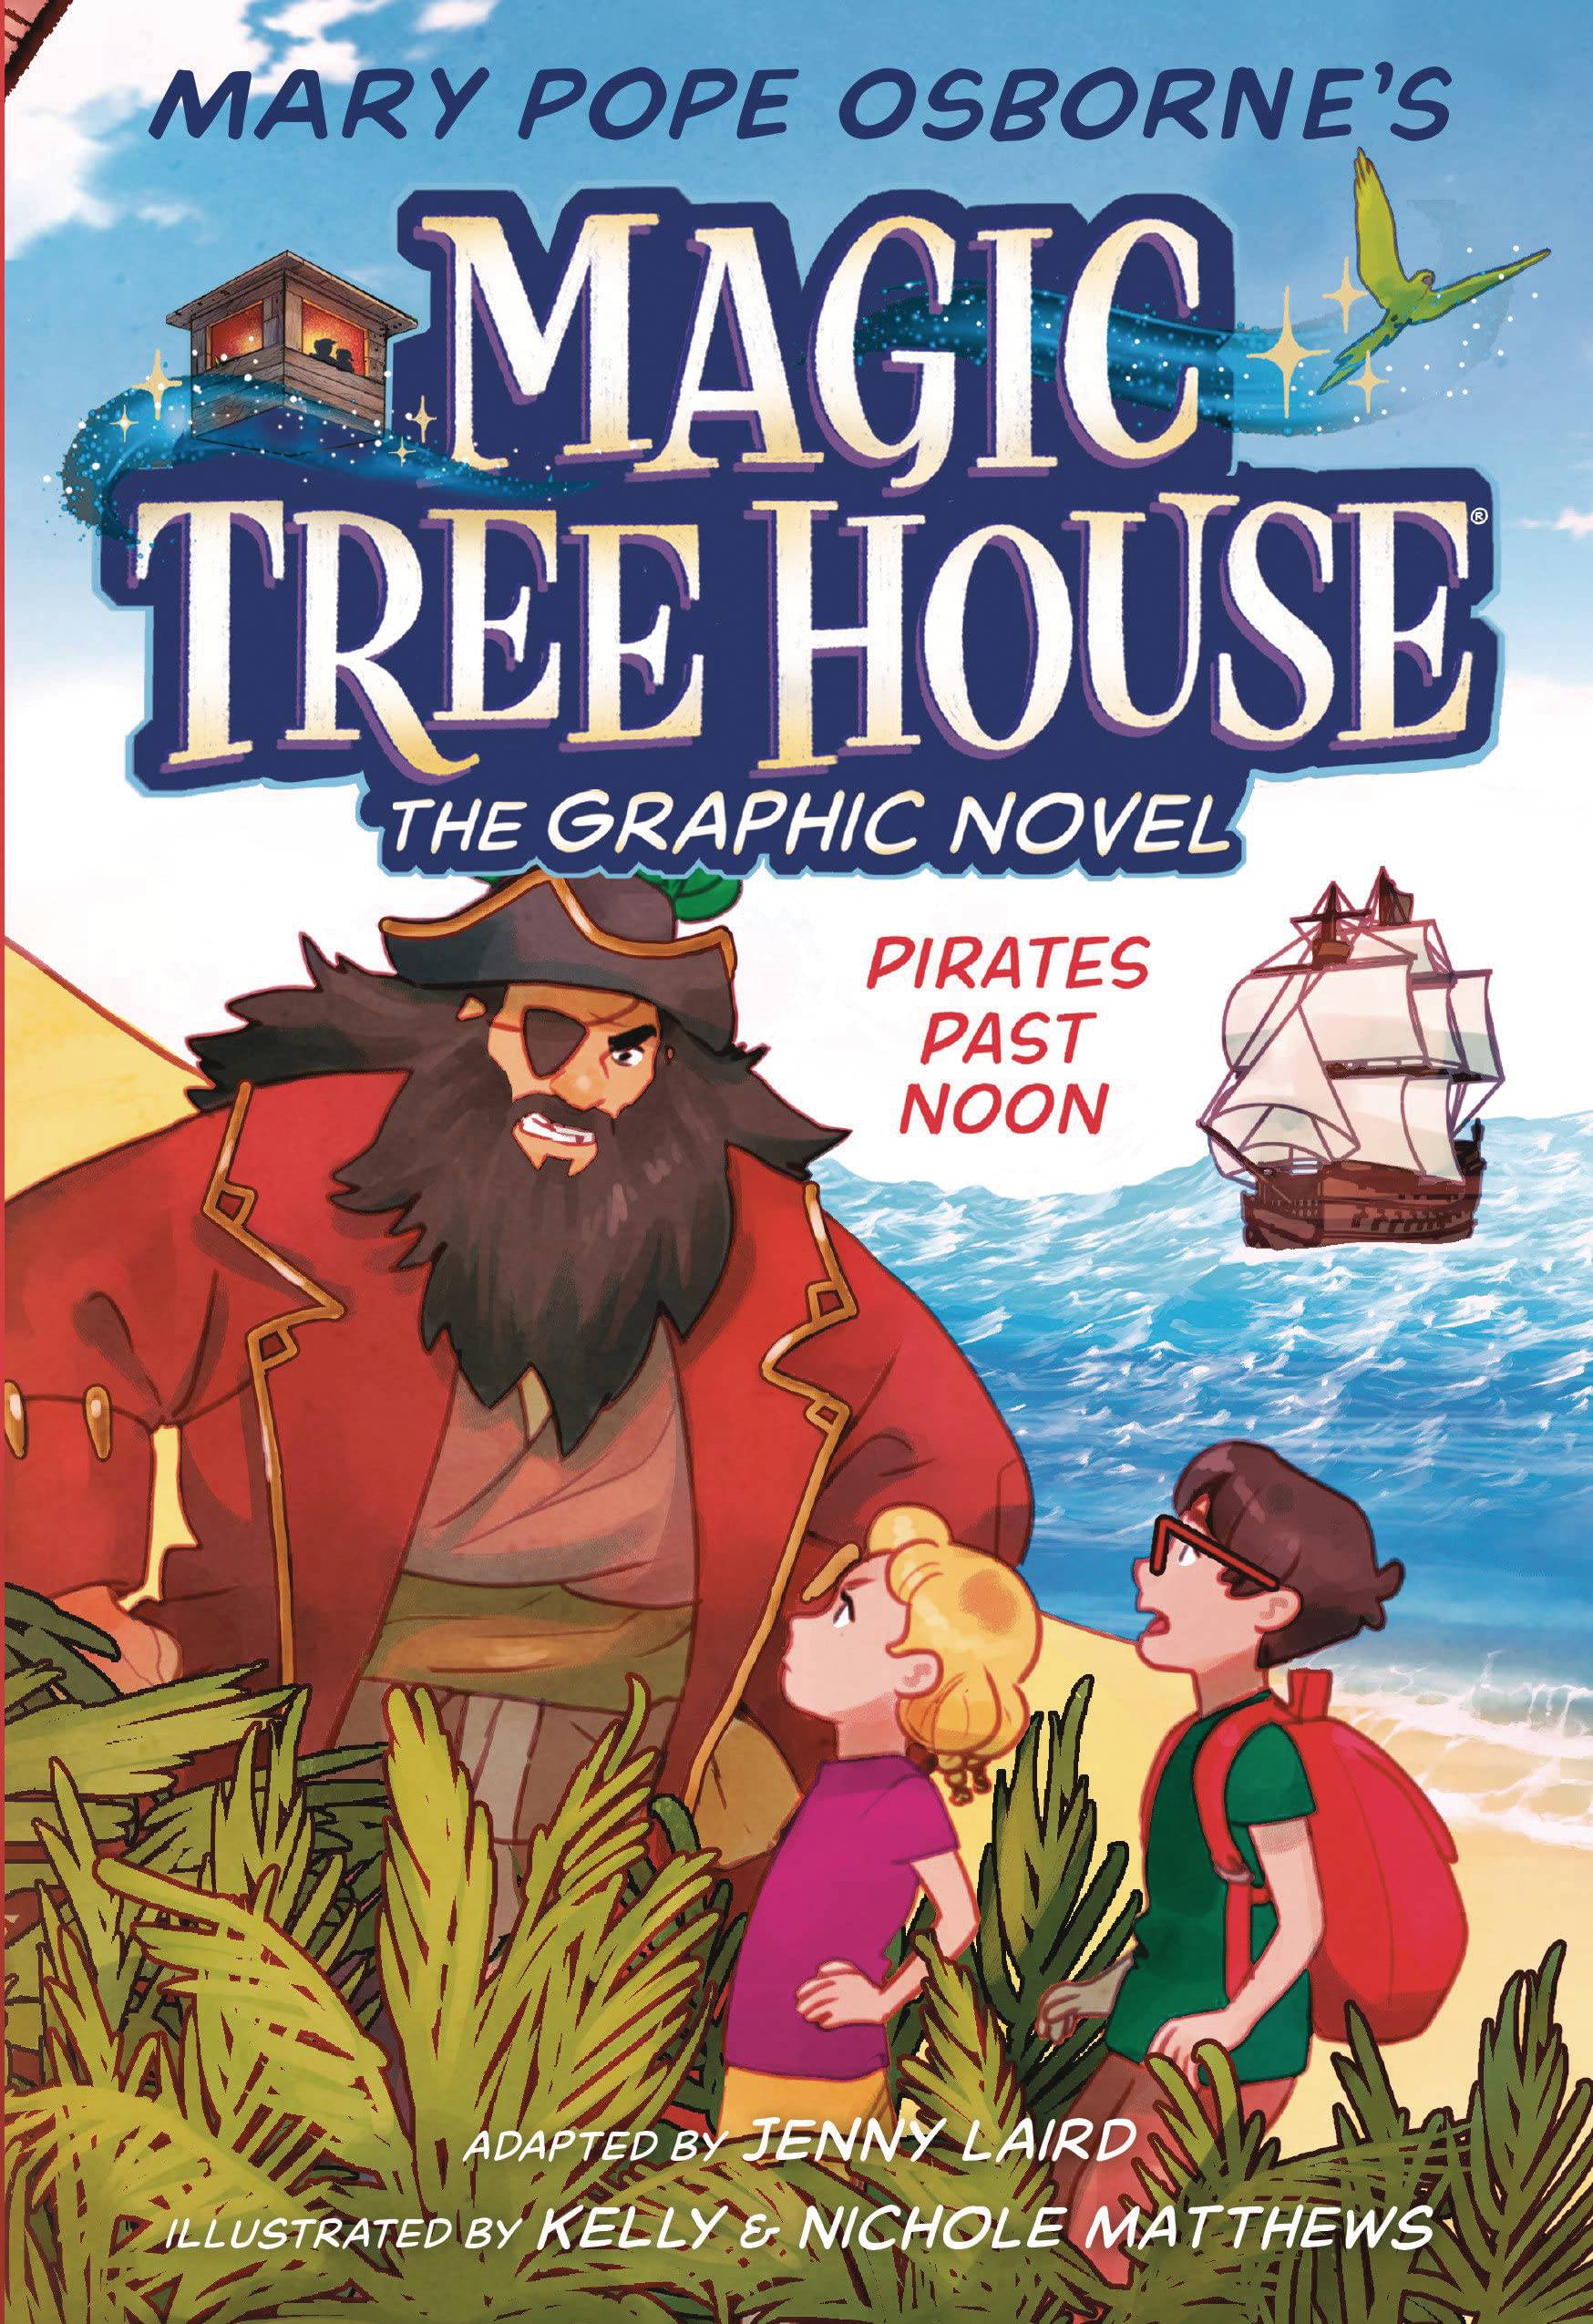 MAGIC TREE HOUSE GN VOL 04 PIRATES PAST NOON